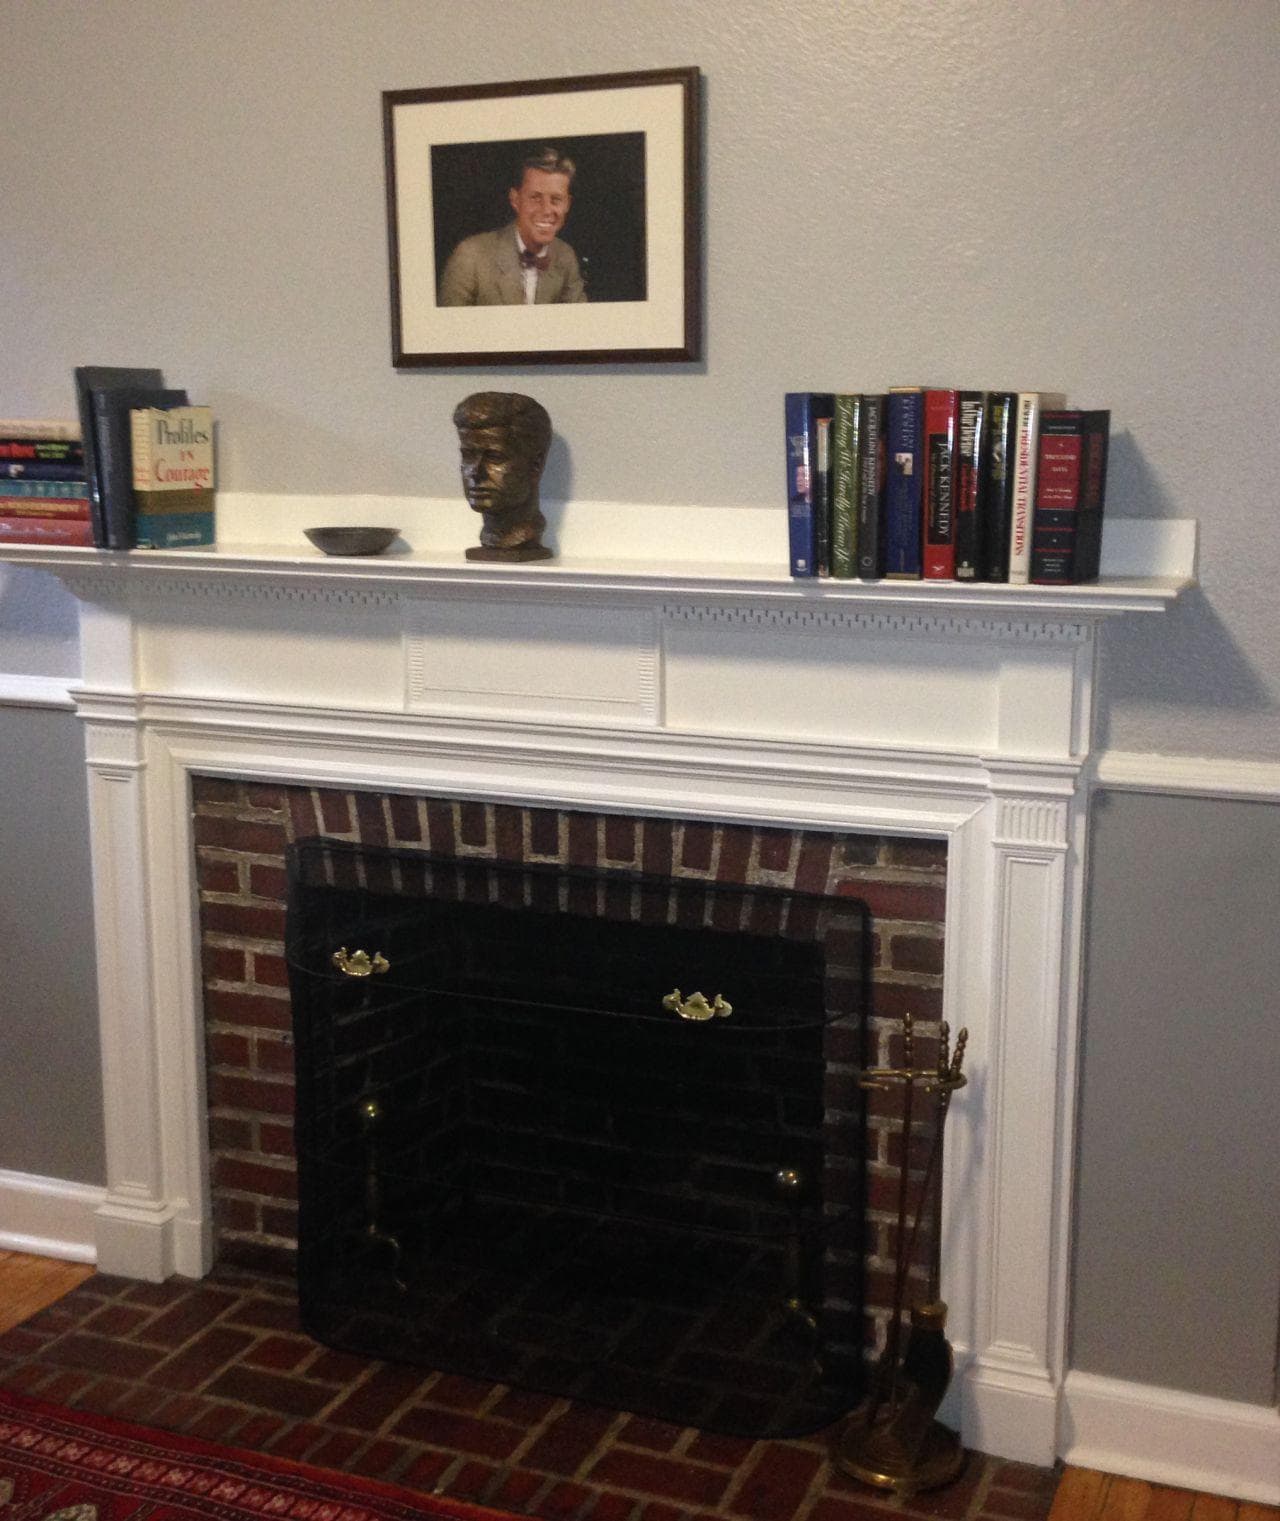 Room F-14 in Harvard's Winthrop House, now decorated with books by and about JFK (Bruce Gellerman/WBUR)